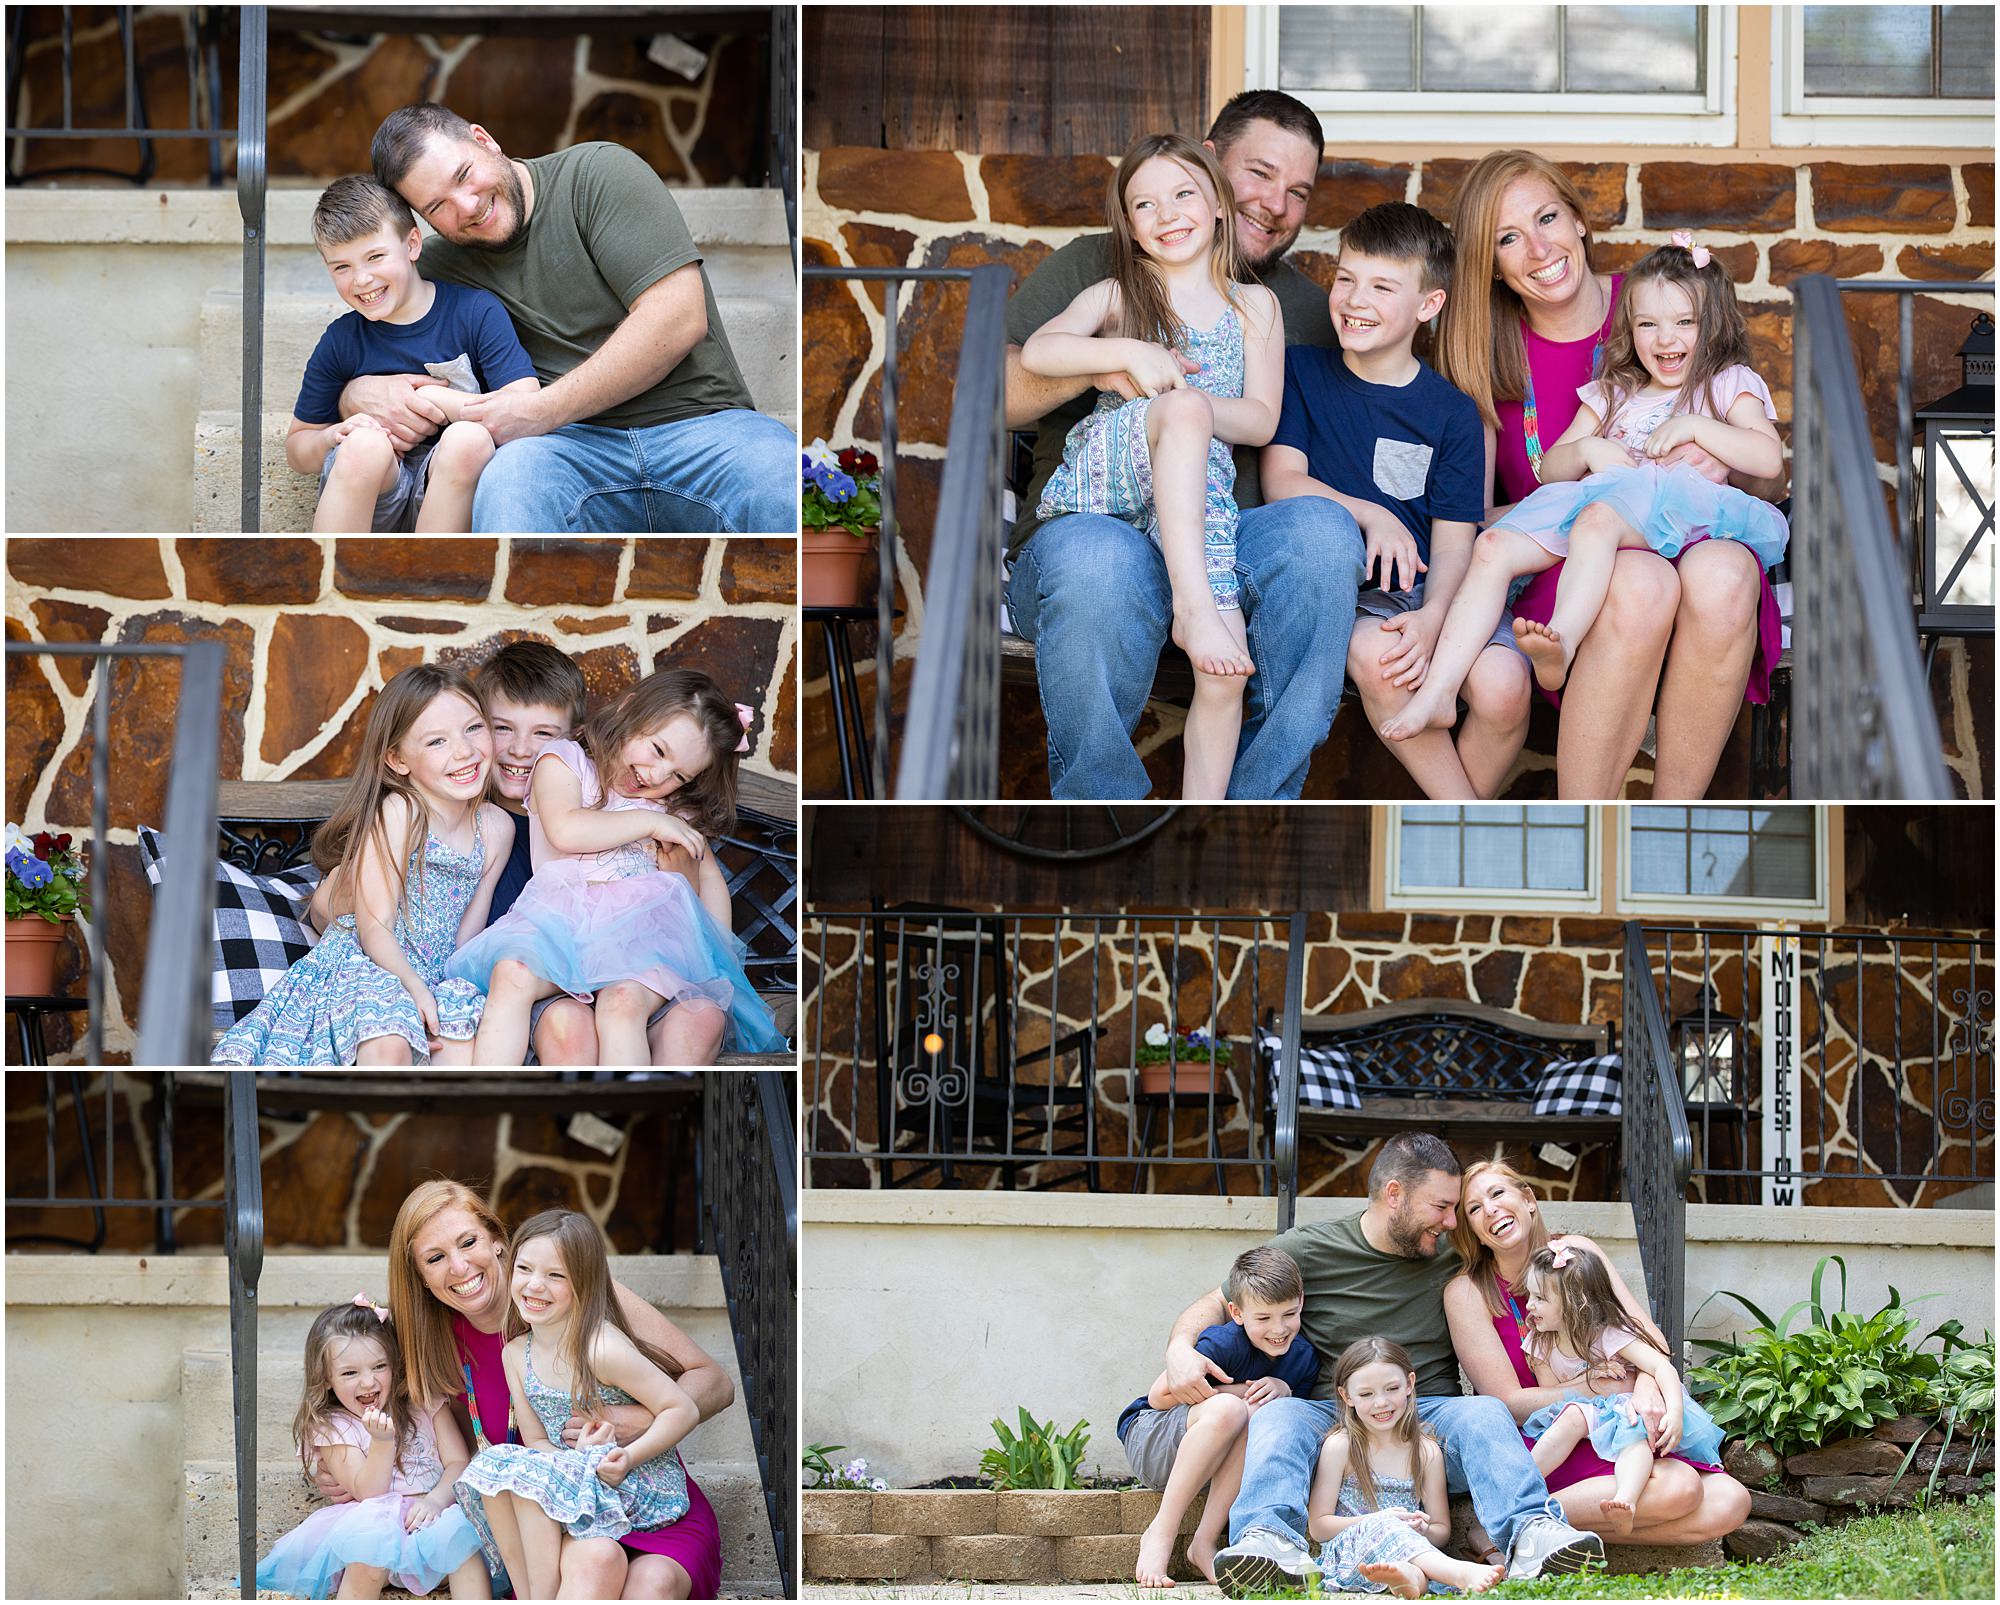 A Moorestown, NJ family photographed by Moorestown Family Photographer, Susan Hennessey